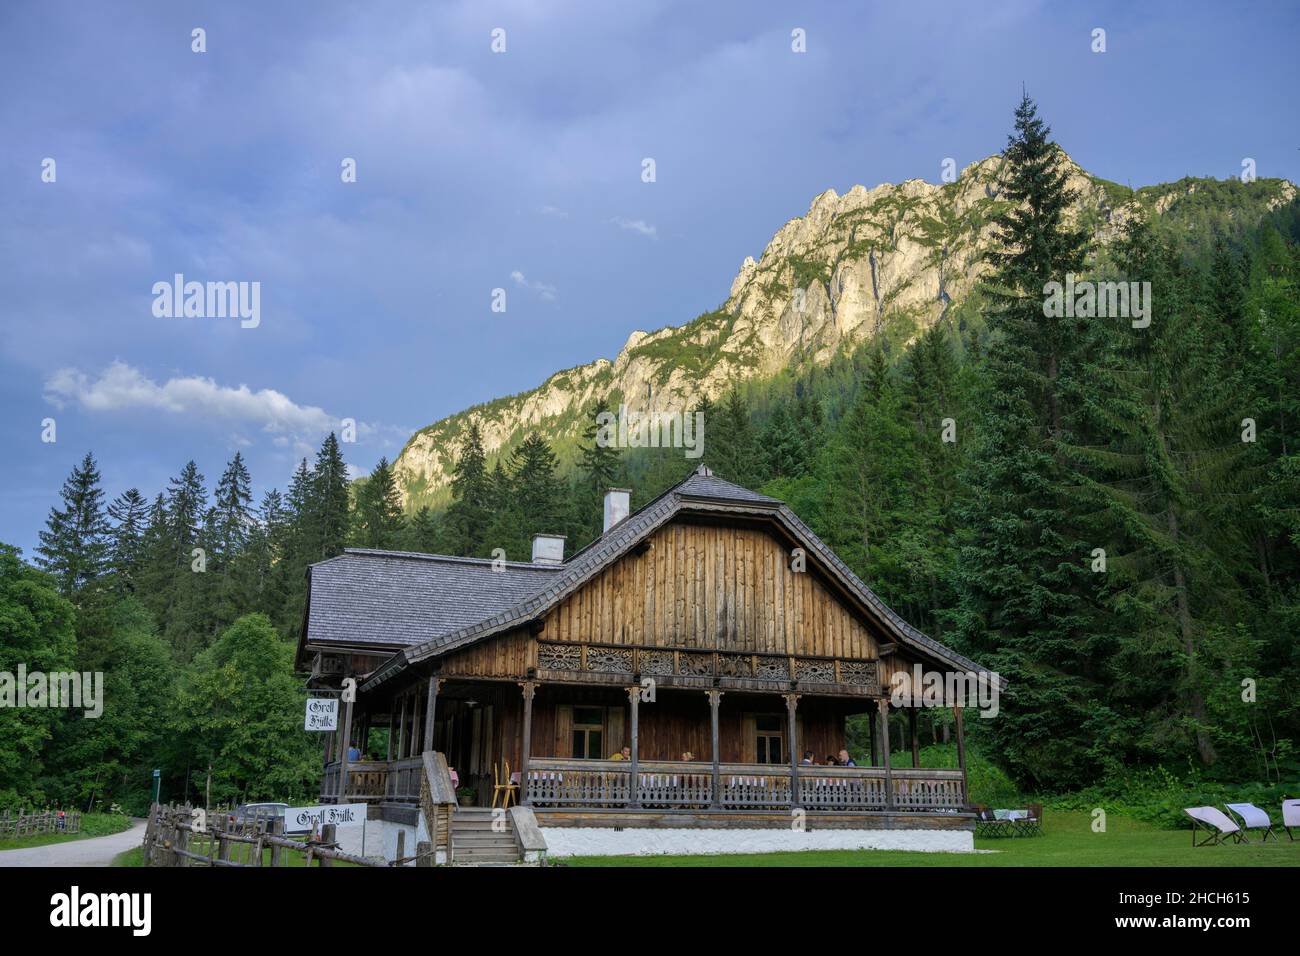 Gretlhuette, Stainach-Puergg, Styria, Austria Stock Photo